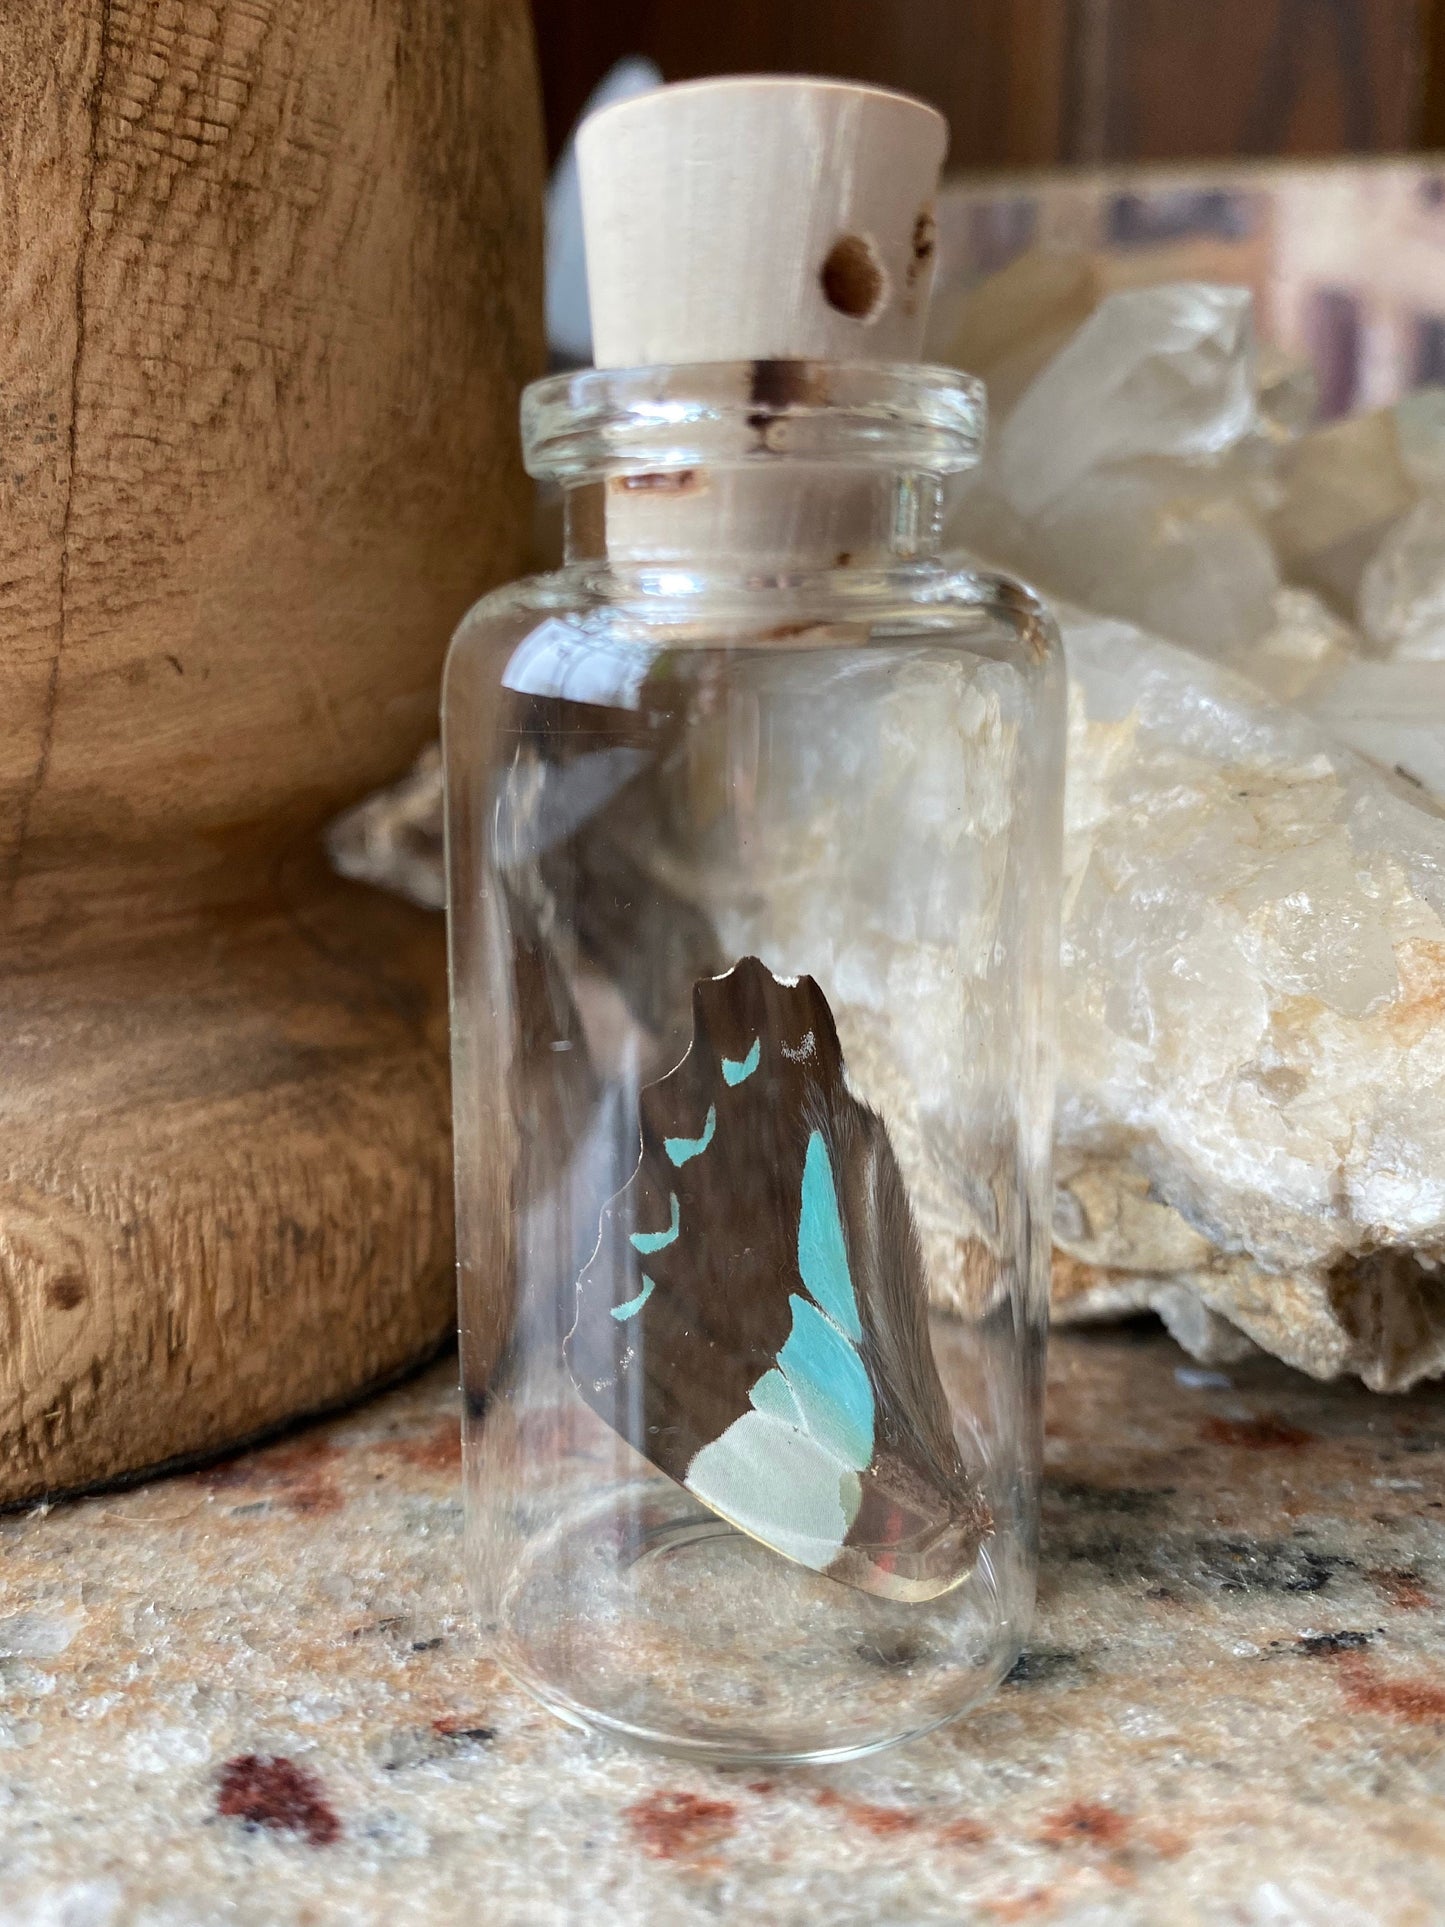 Real Butterfly Wing in Bottle M-2 Specimen Jar ethically sourced Funds Conservation